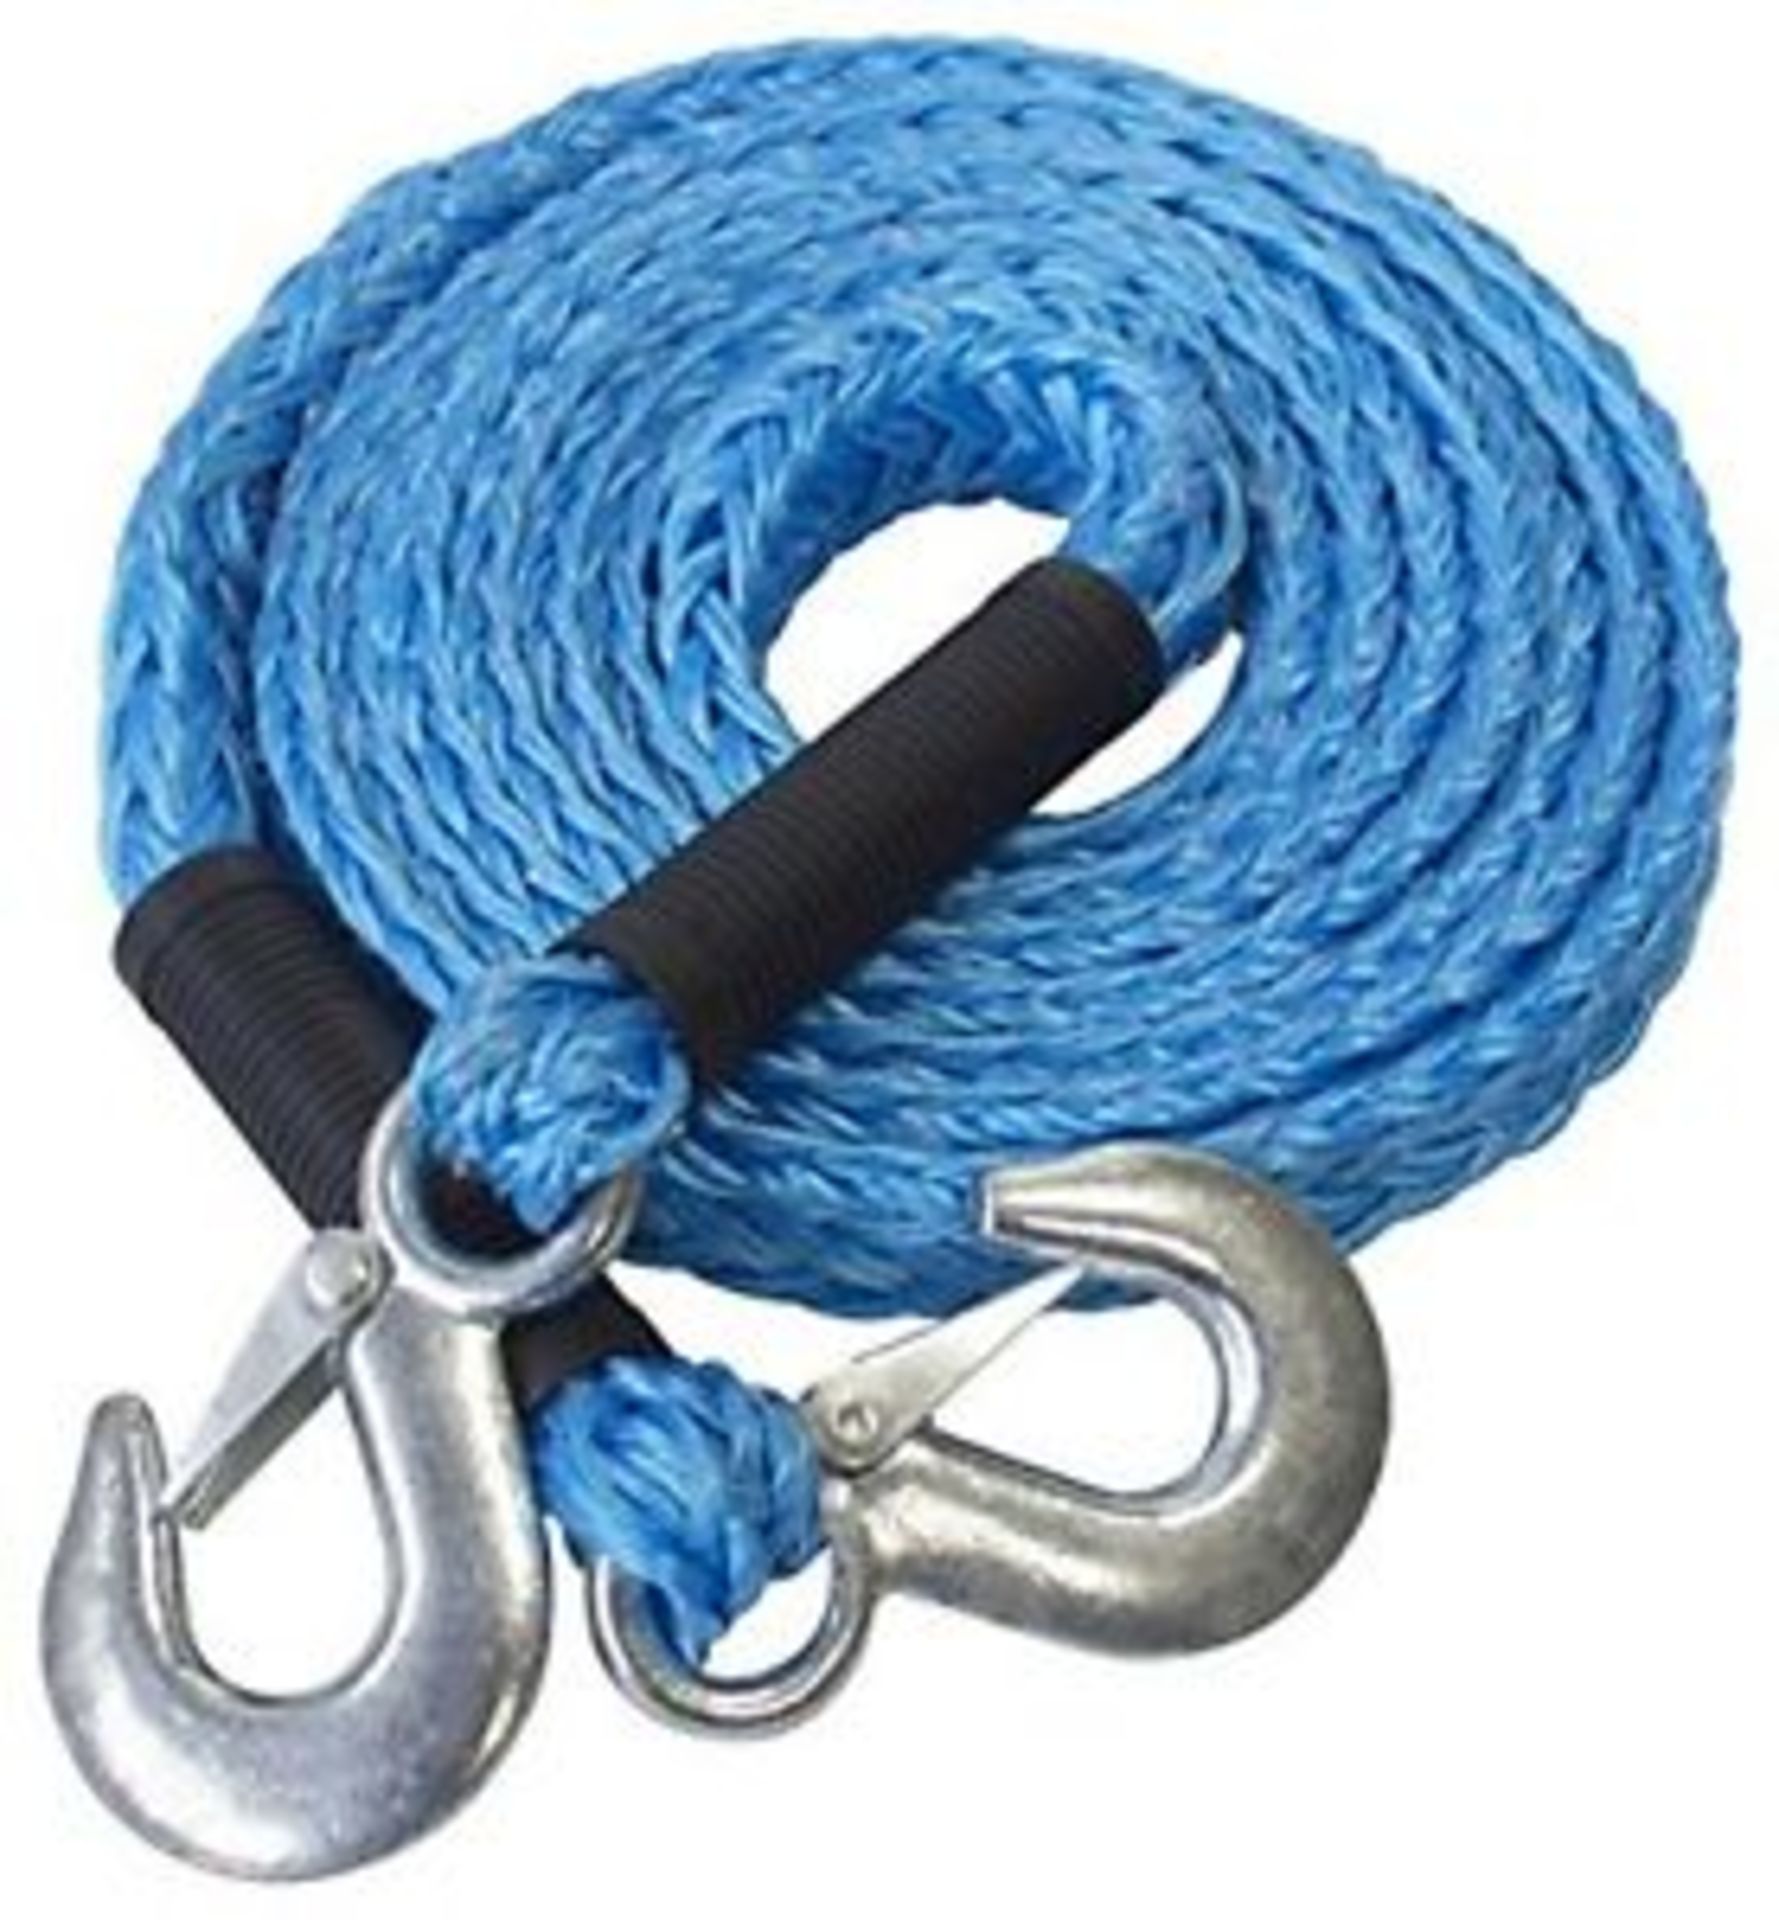 V Brand New Four Metre Tow Rope With Shackle Hooks - Extremely Strong Polypropylene Rope X 2 YOUR